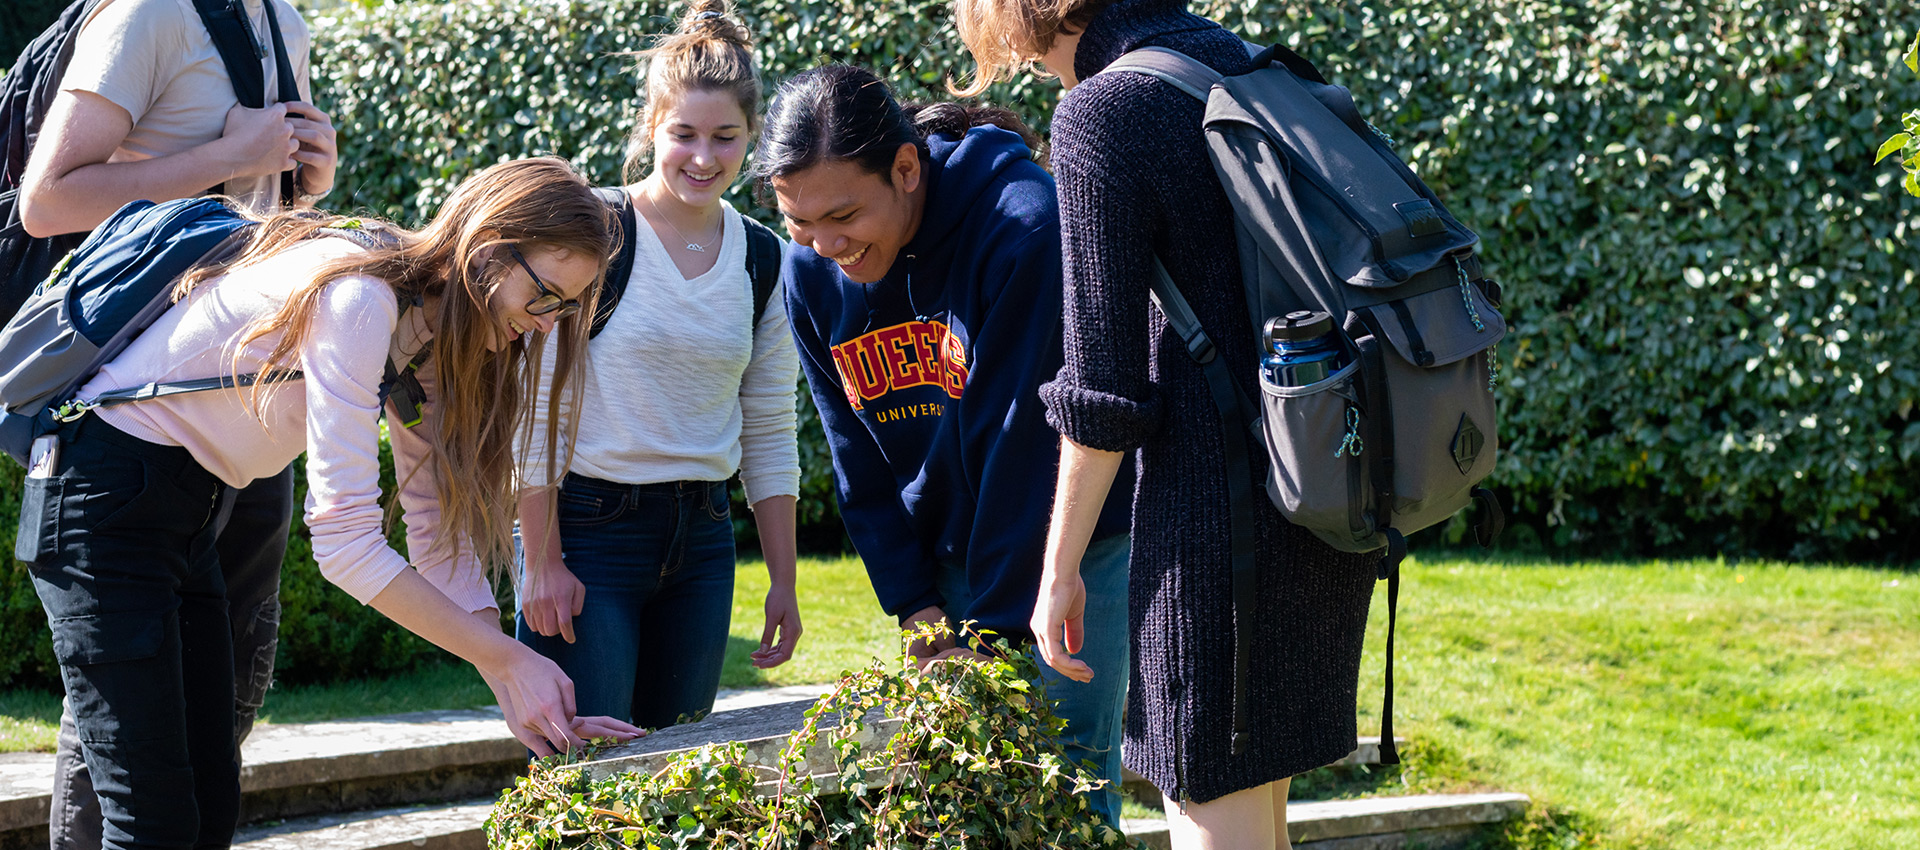 Students exploring the gardens